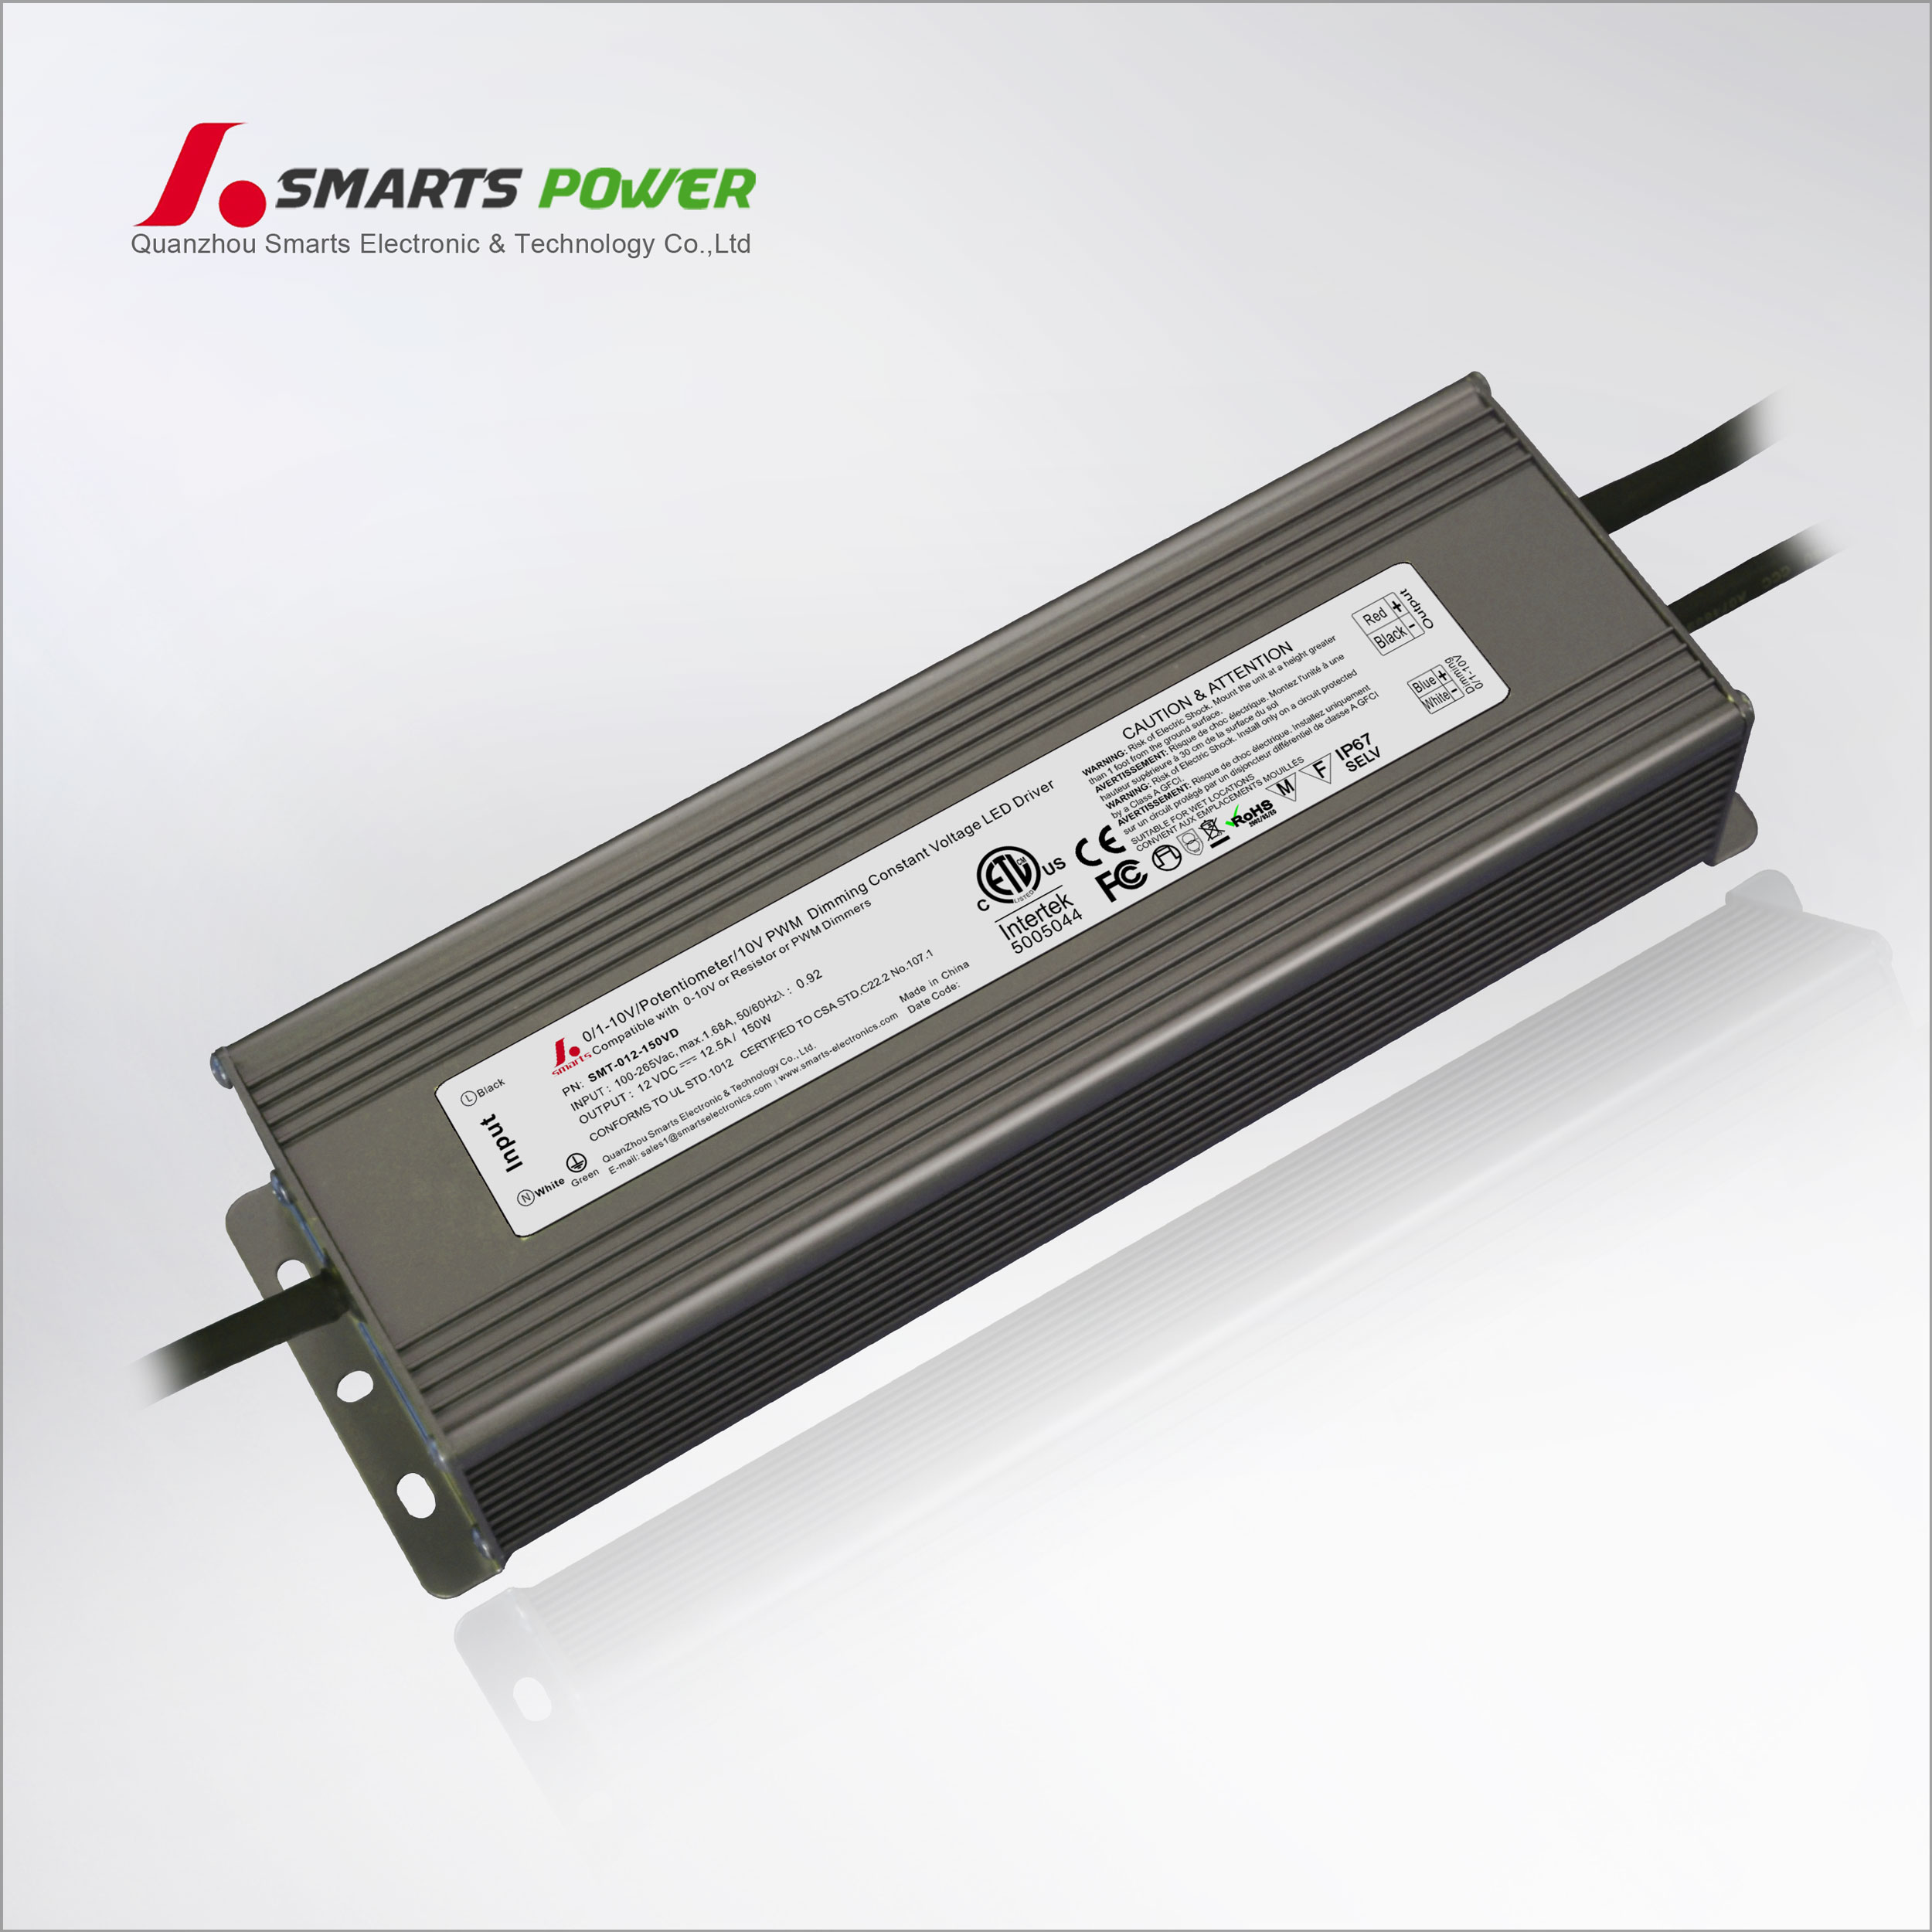 Trailing edge led dimmers